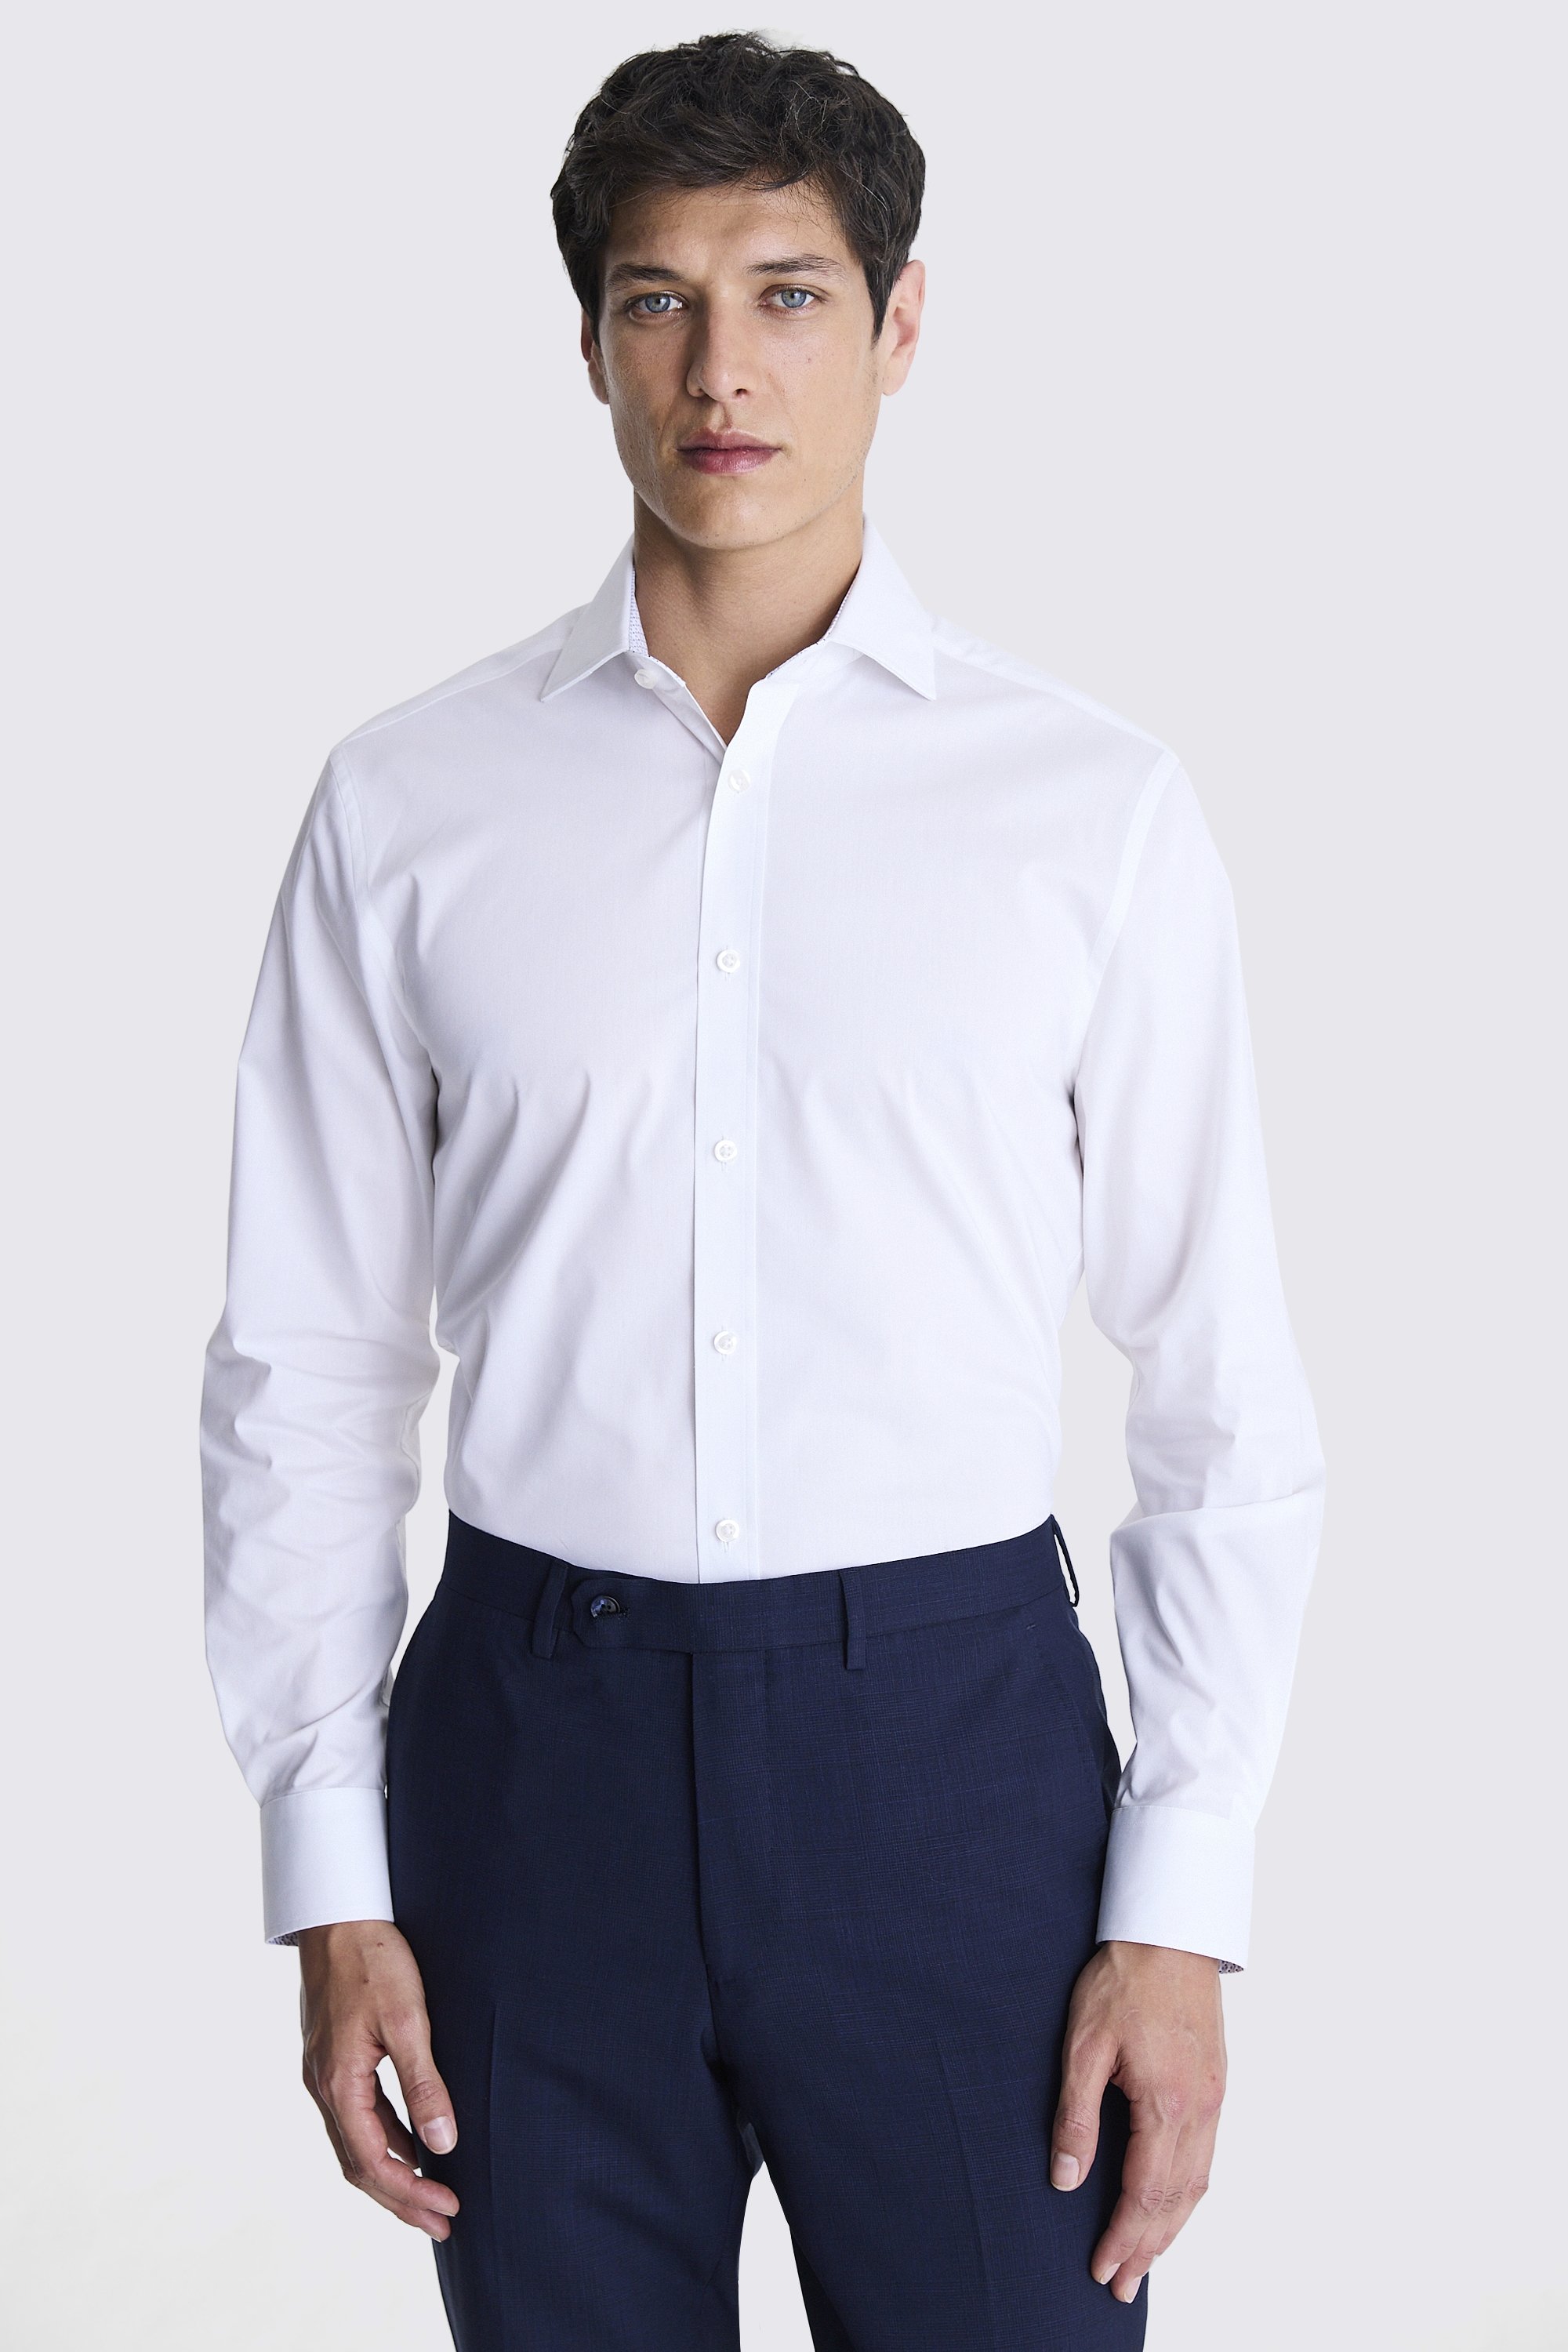 Tailored Fit White Stretch Contrast Shirt | Buy Online at Moss